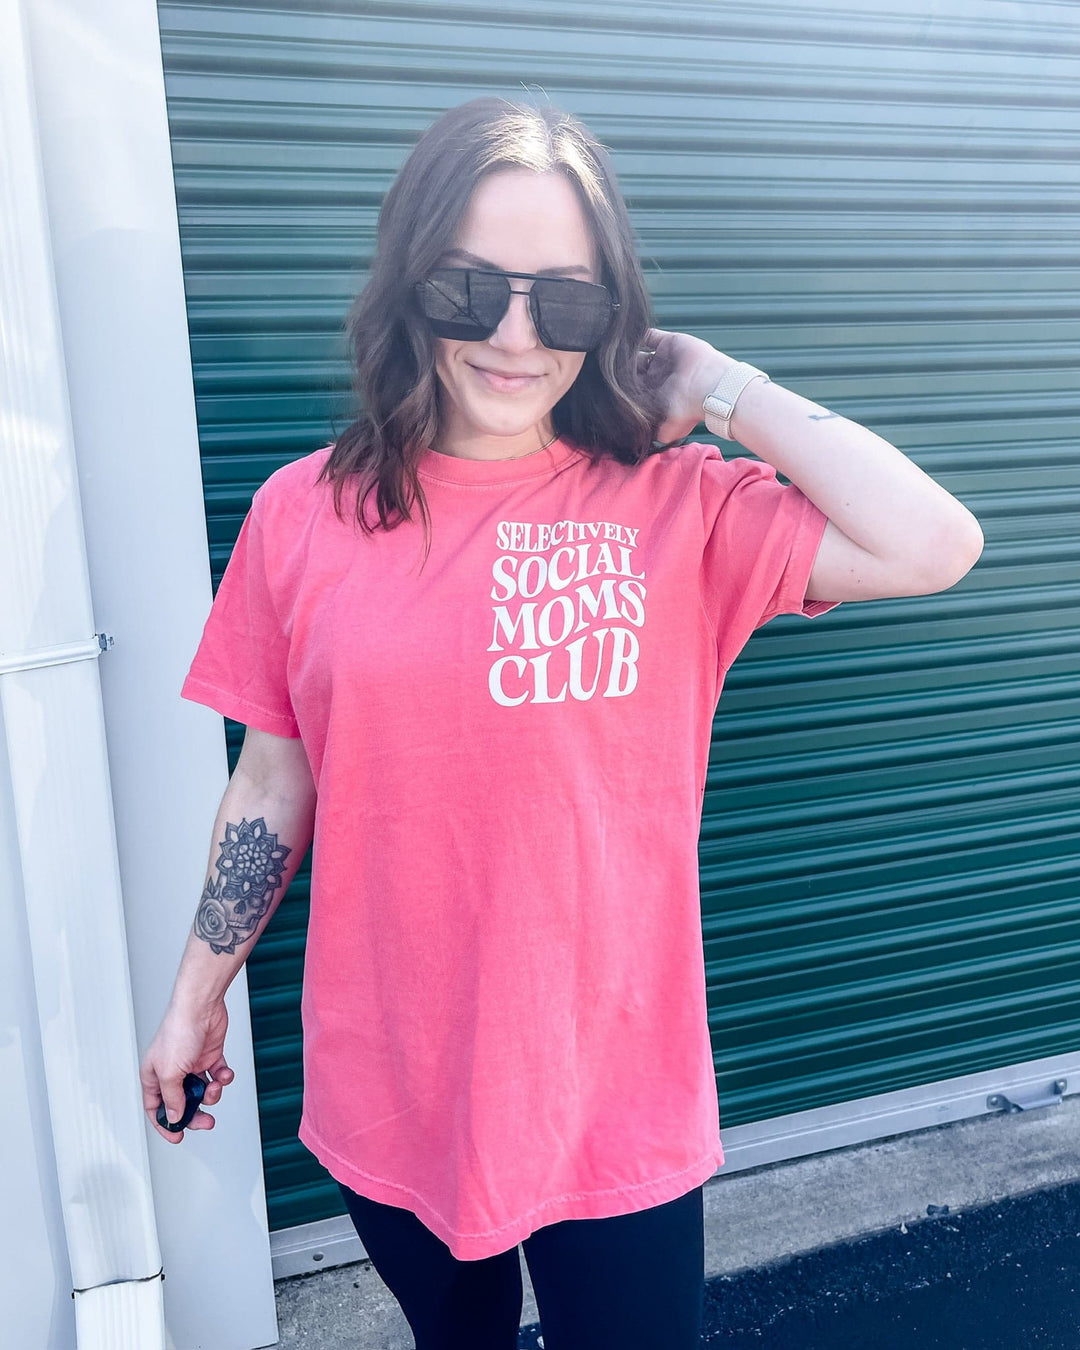 Selectively Social Moms Club Tee - Watermelon